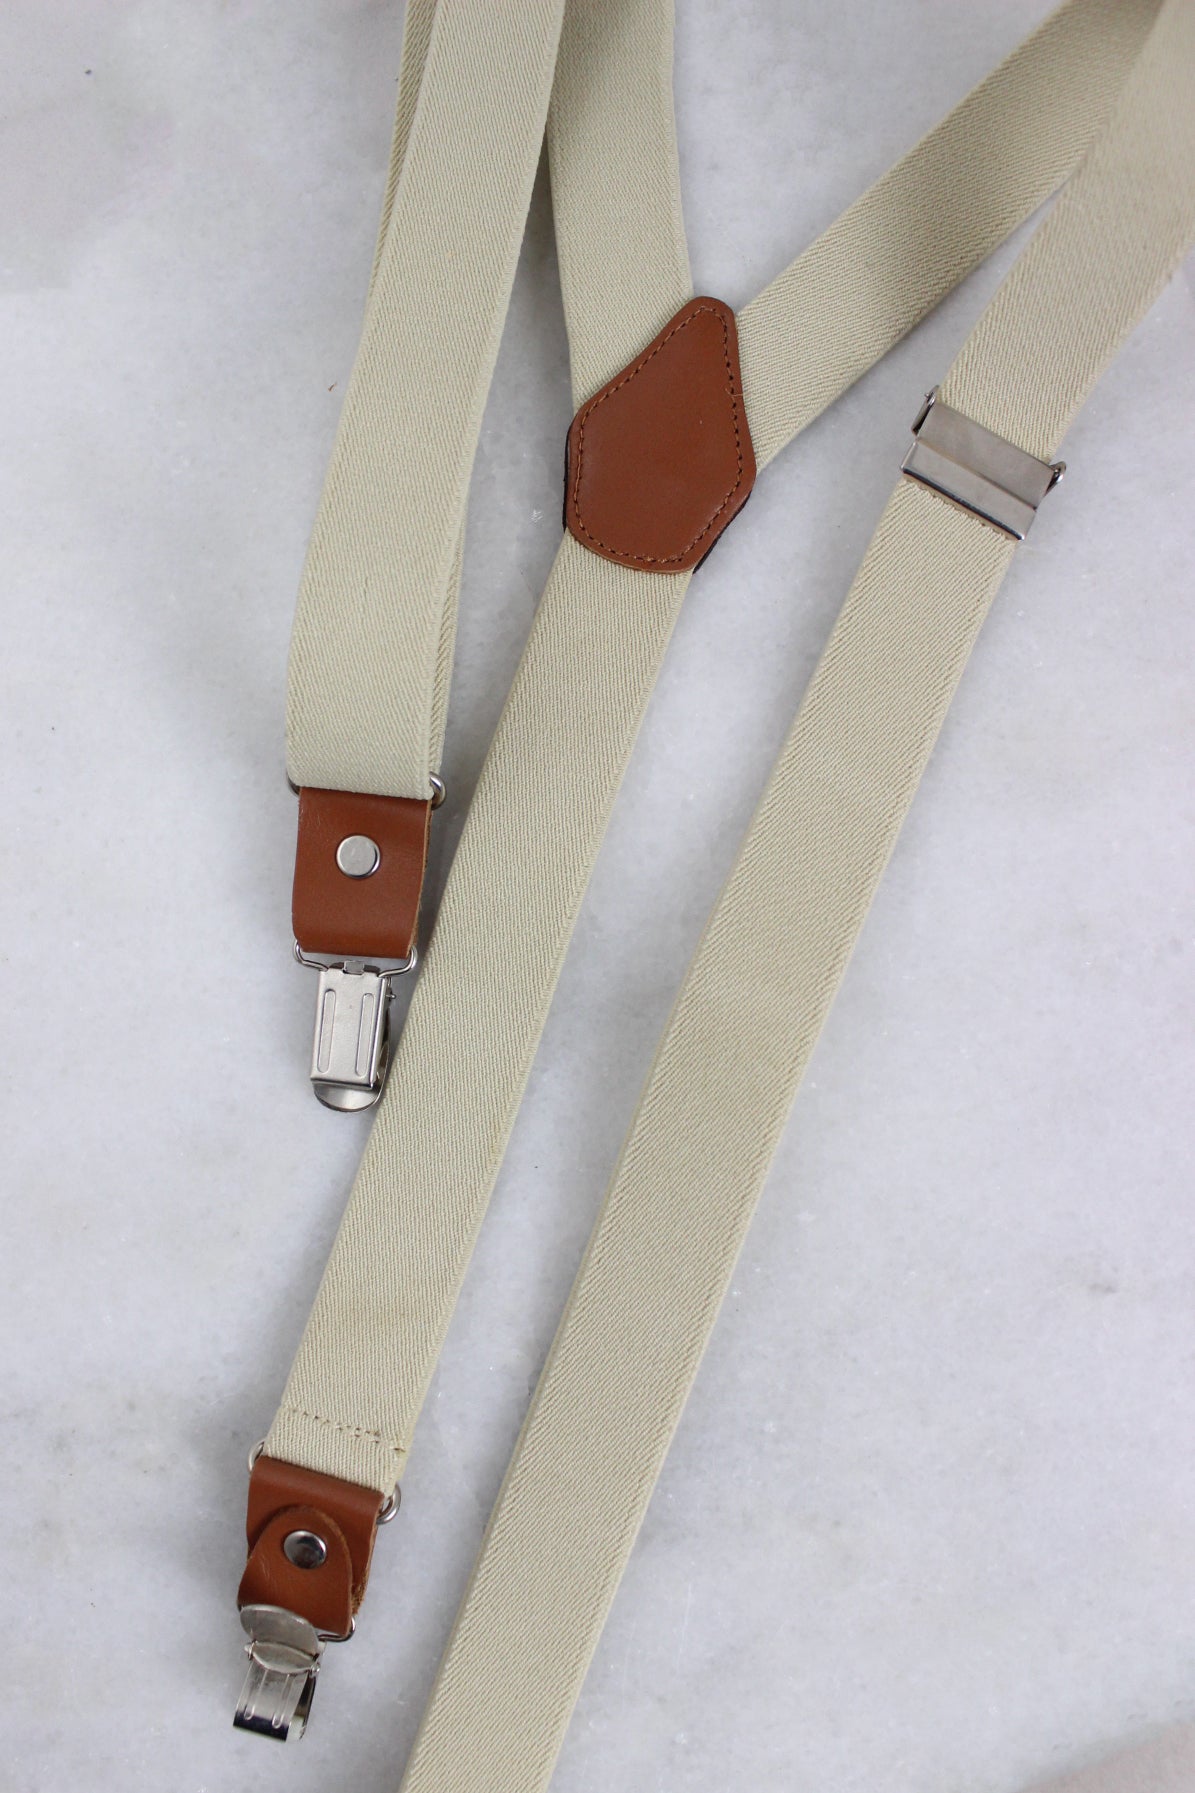 detail view with leather accents and metal clasps of suspnders.